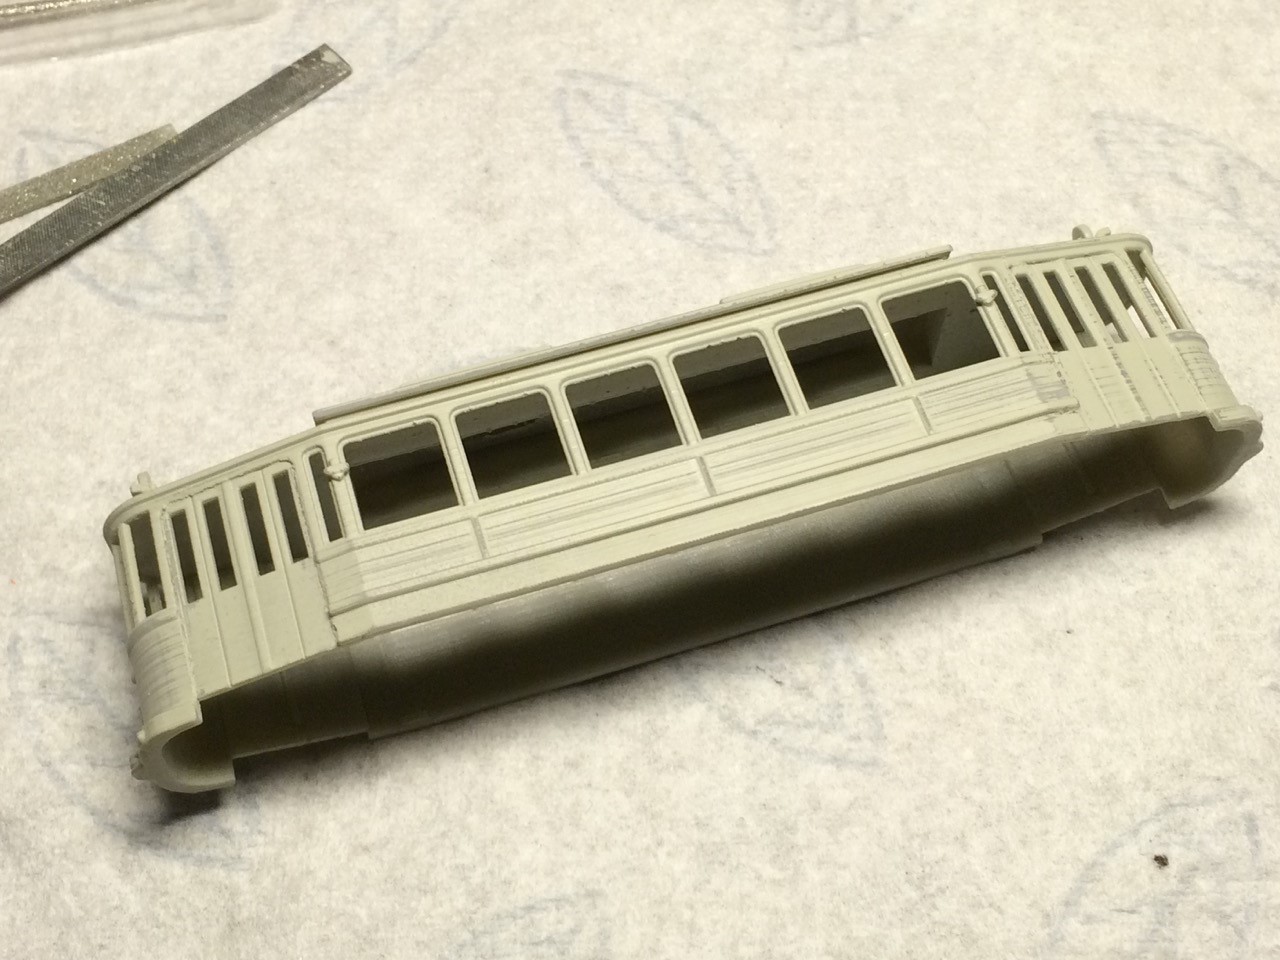 Tutorial: How to Paint a Prime Gray Scale Modell